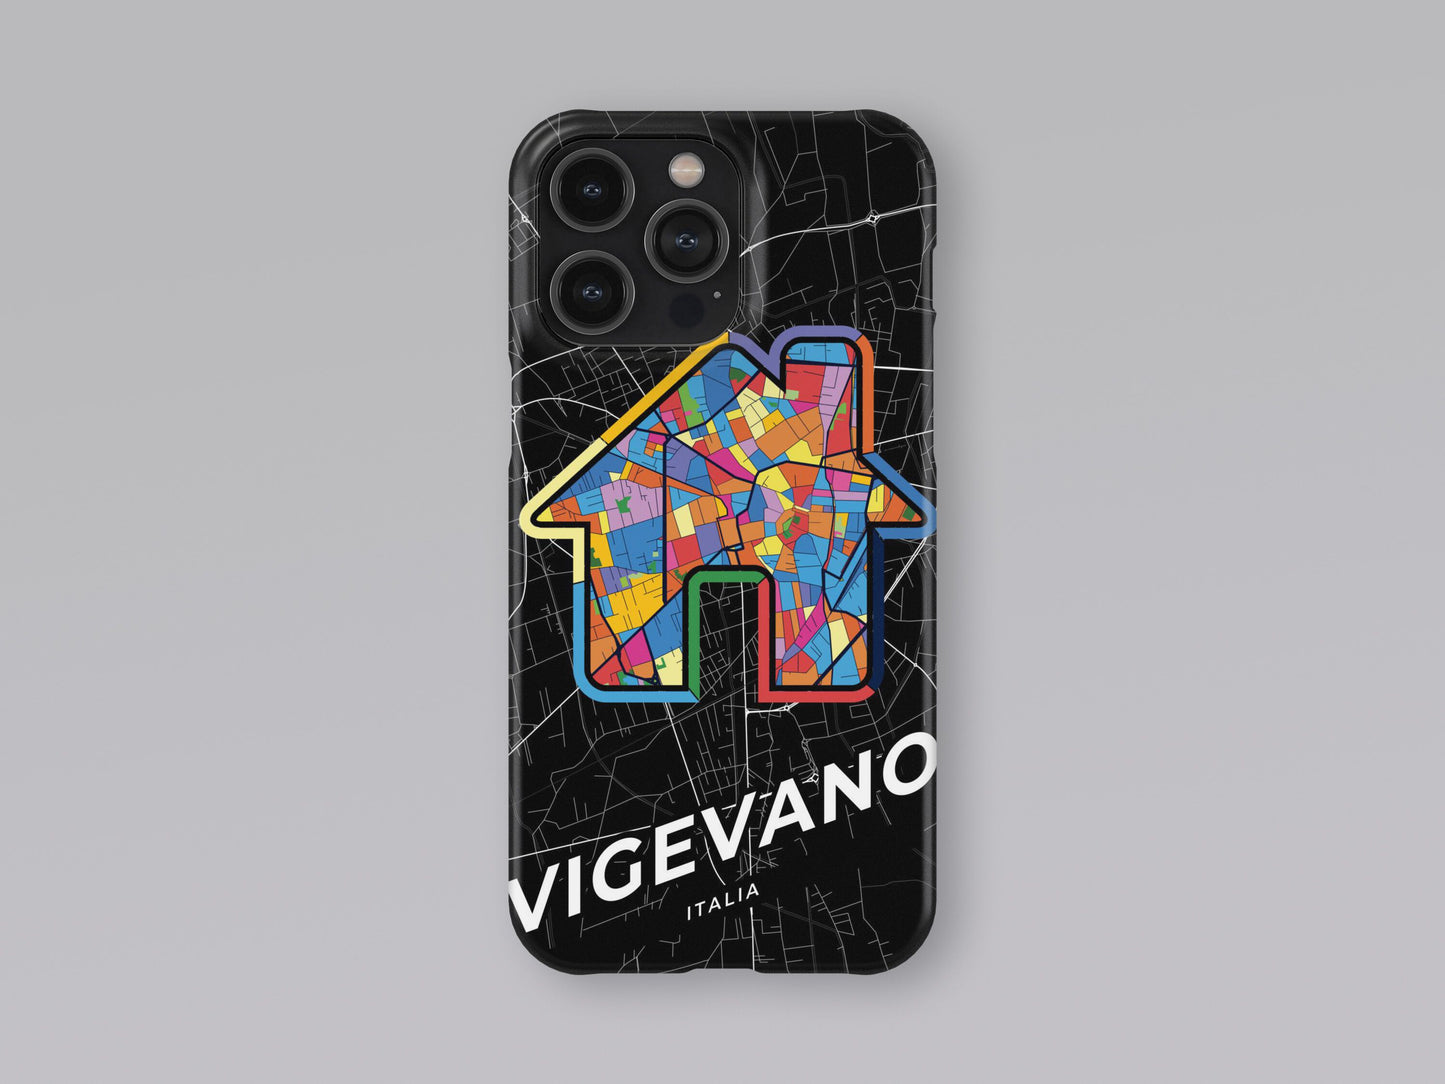 Vigevano Italy slim phone case with colorful icon 3